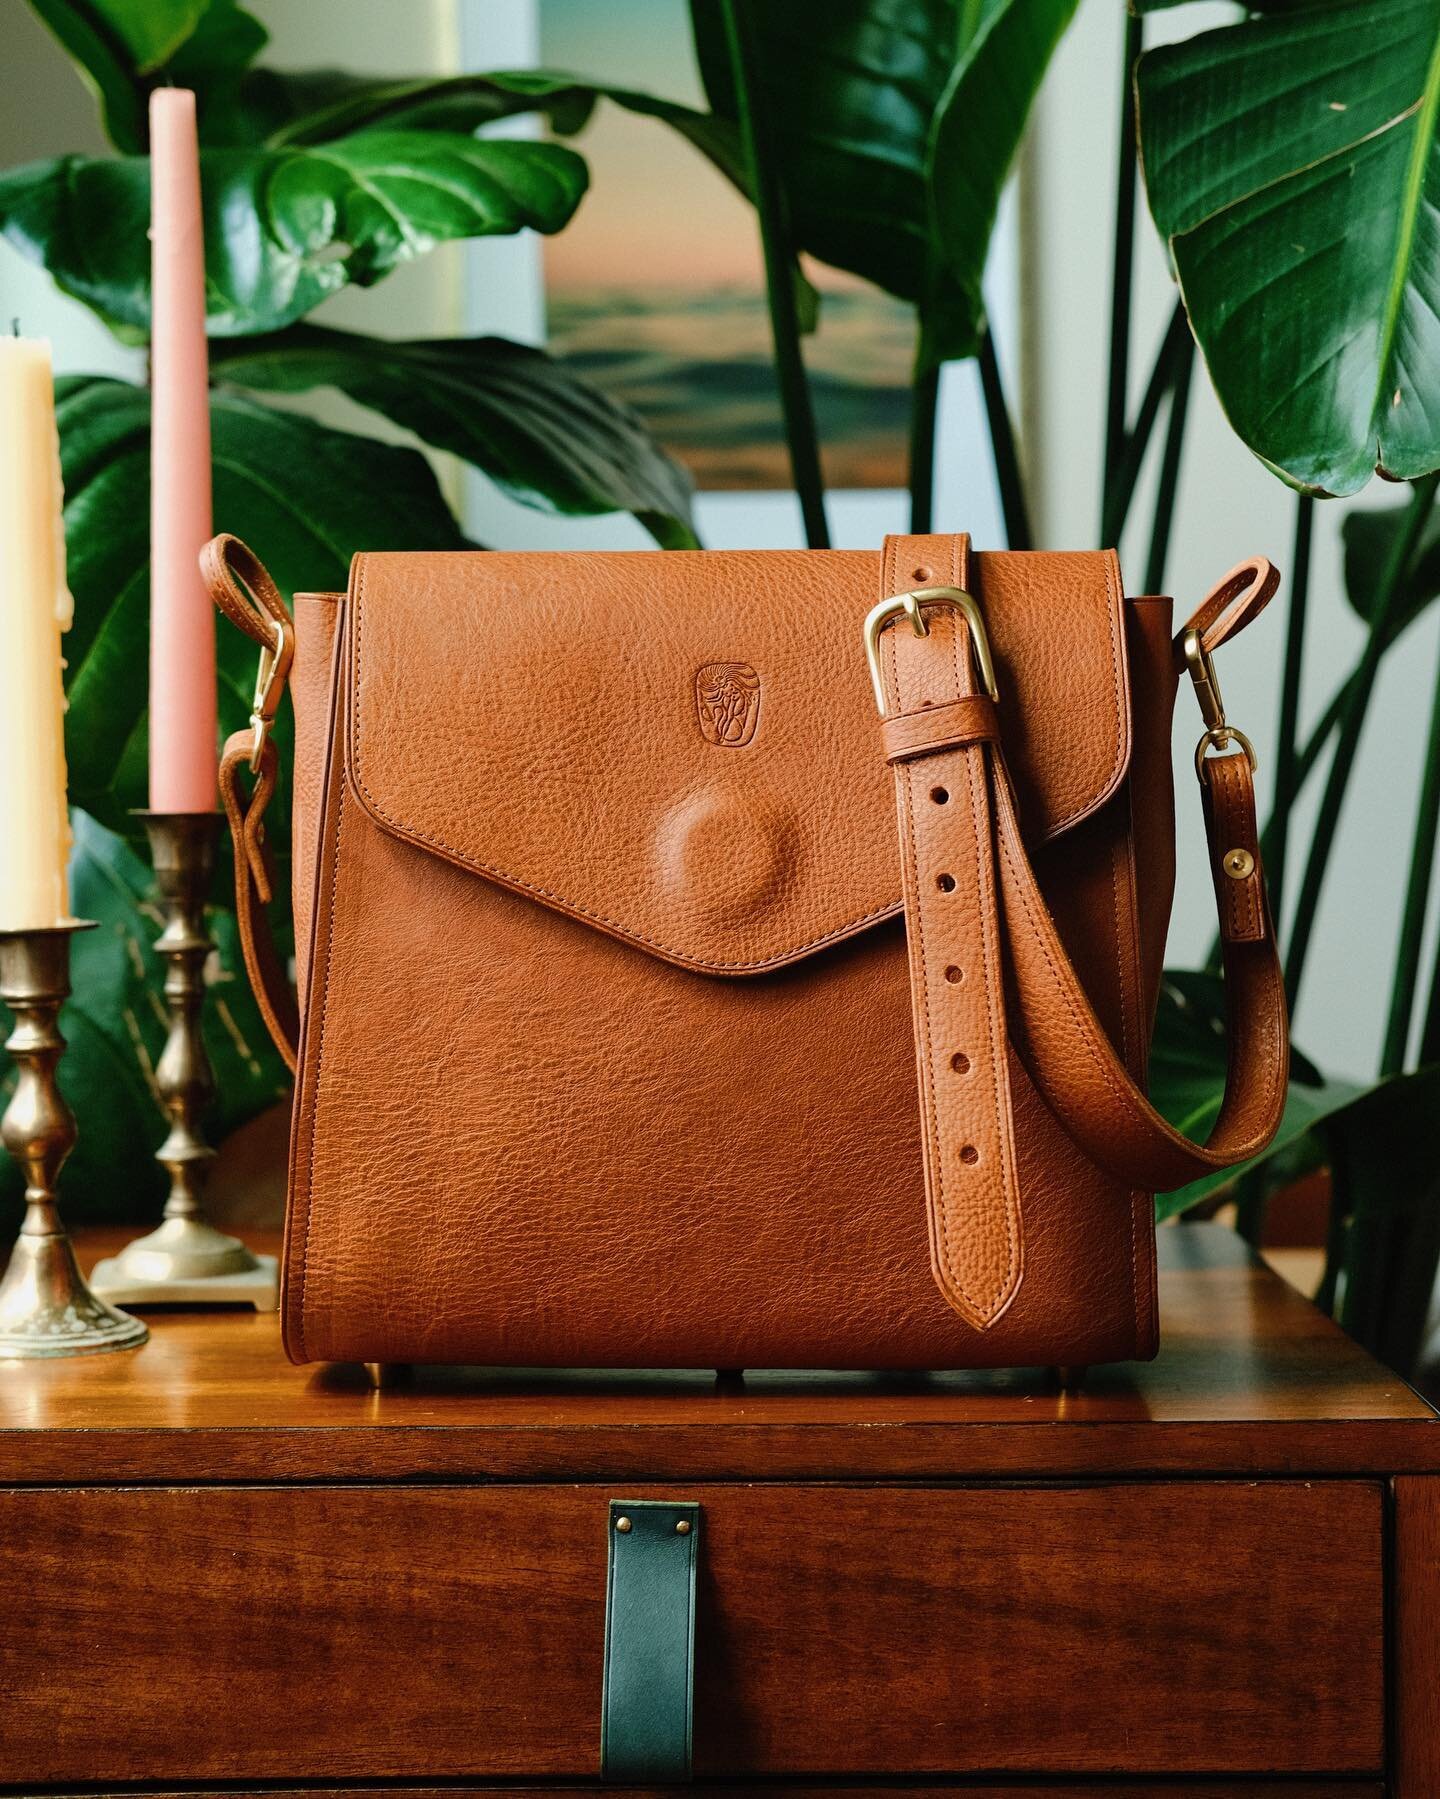 ⌛️ She&rsquo;s got form, function, and everything in between.

Ibis really is my favorite thing that I&rsquo;ve ever designed. Pre-orders open this morning. Can&rsquo;t wait to find out who I&rsquo;m making bags for this month! 🤞